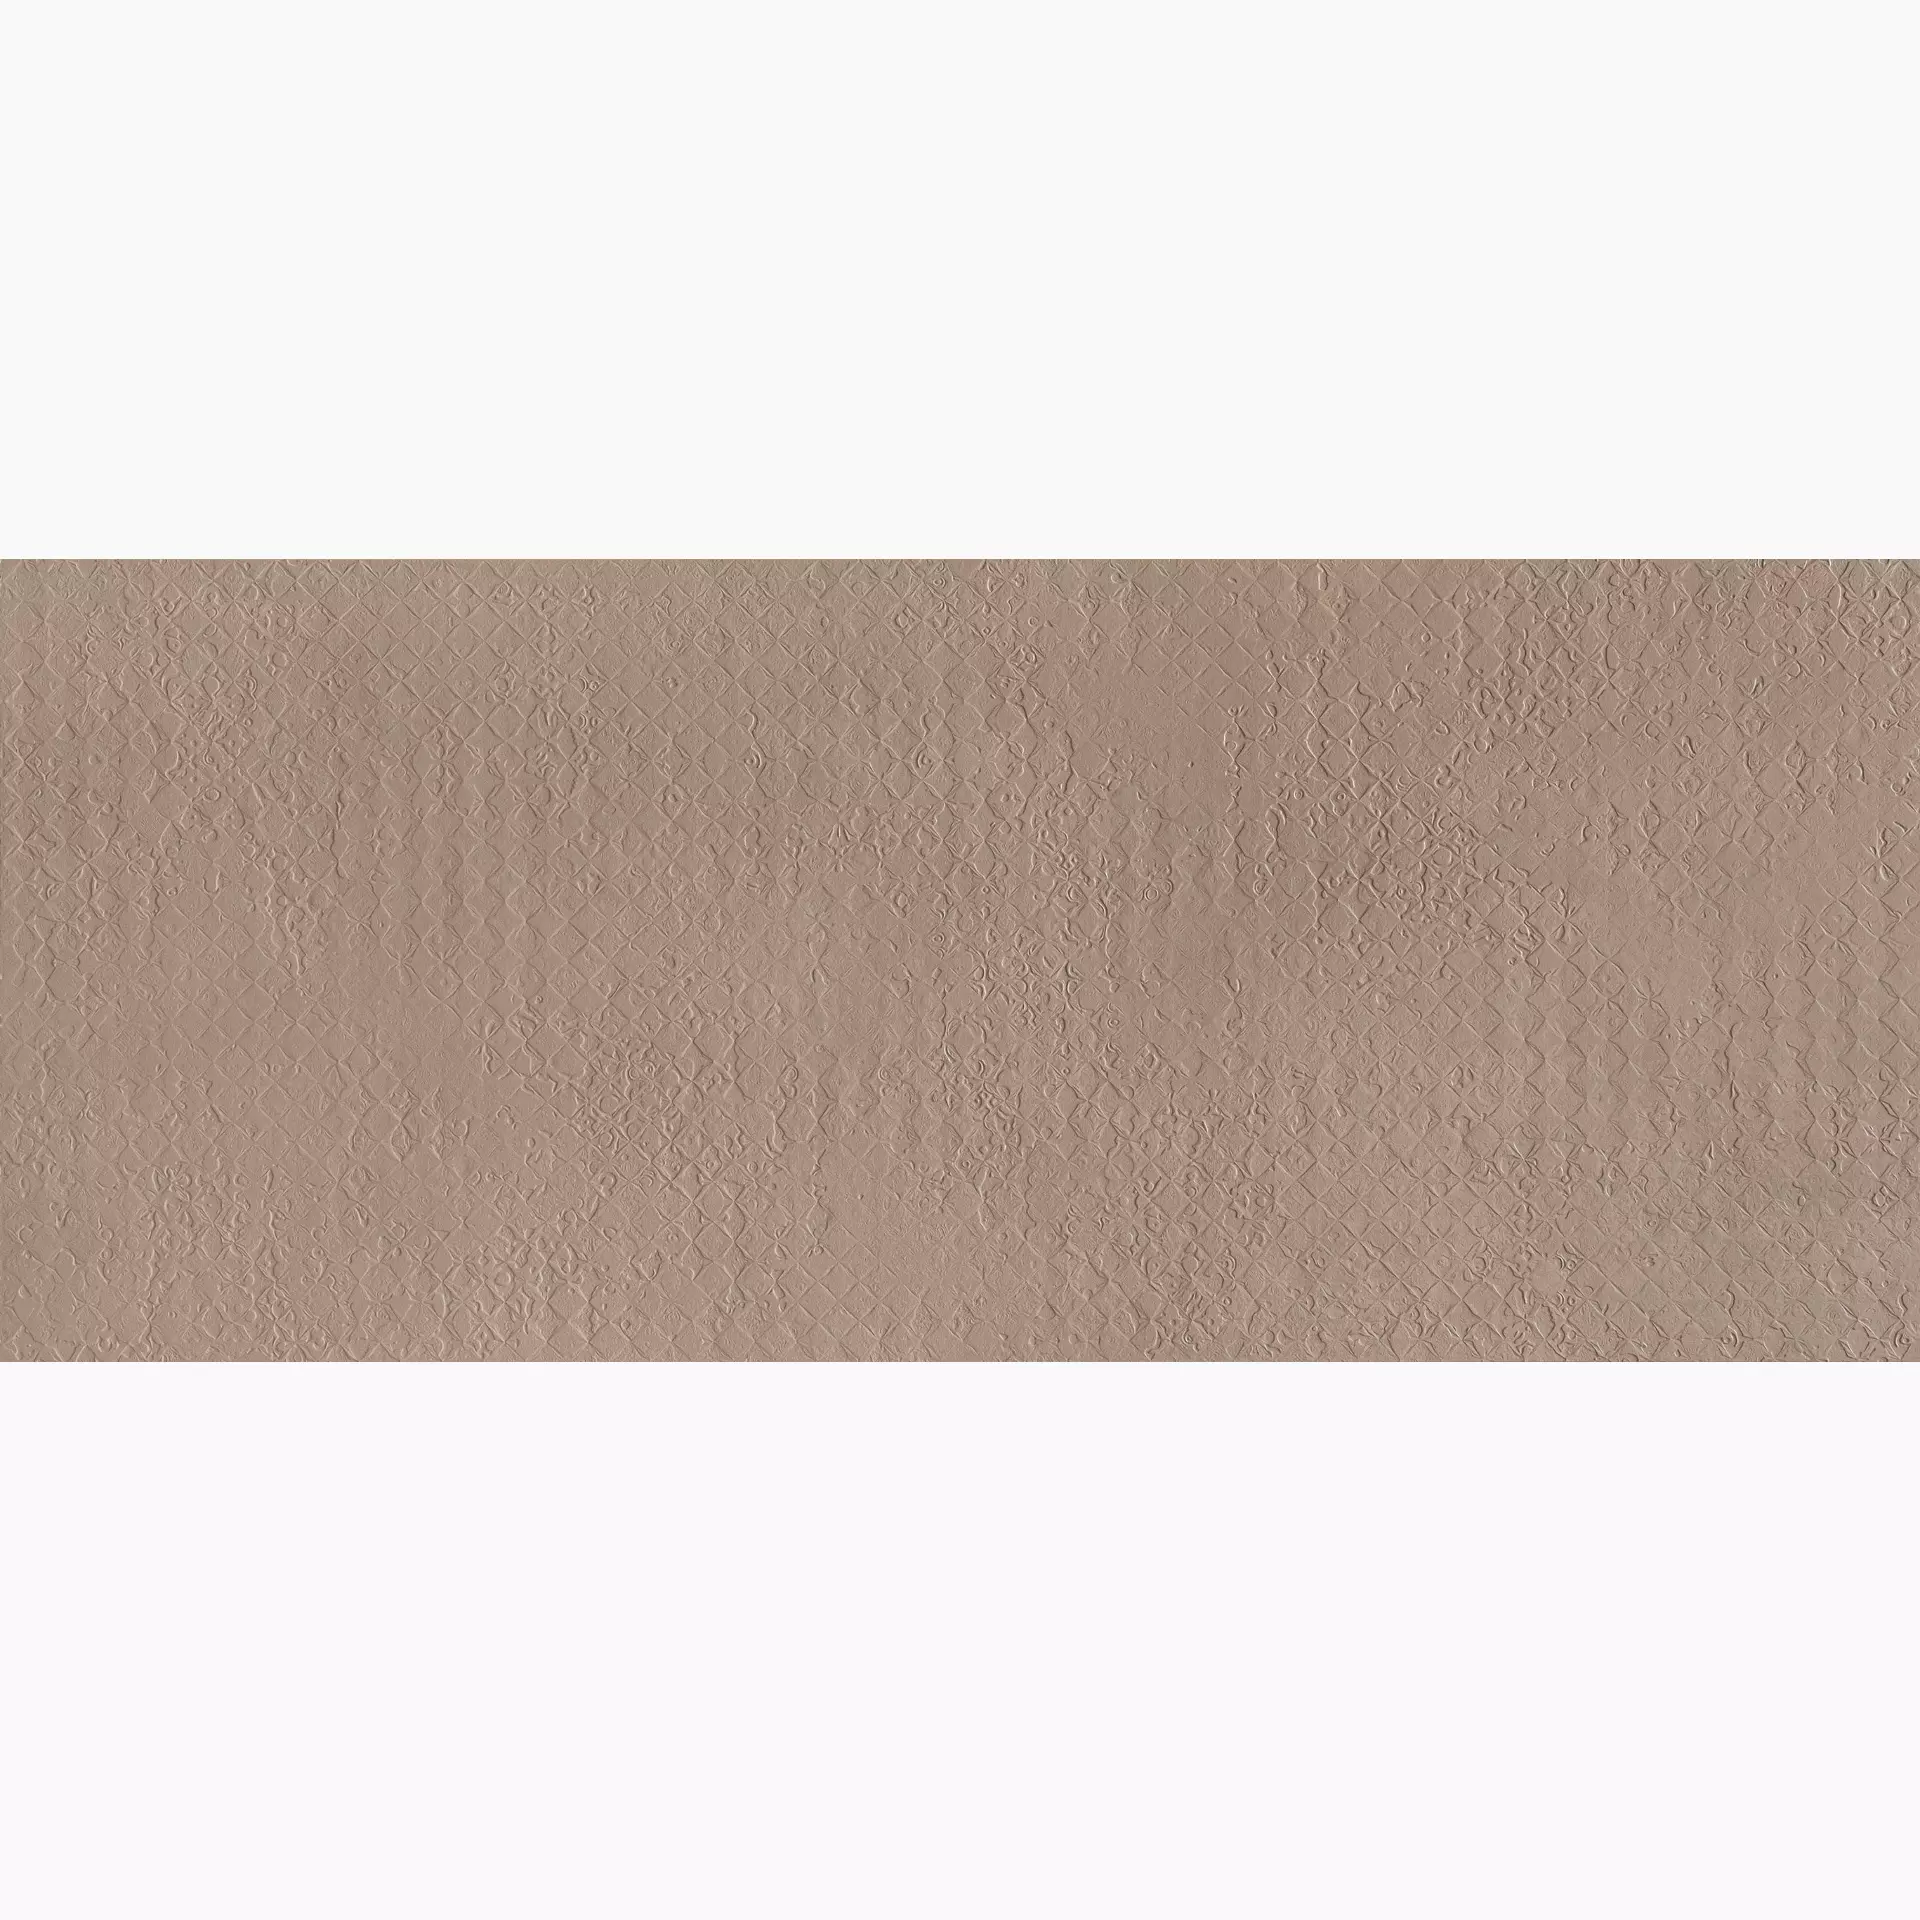 Supergres Colovers Wall Love Brown Nest Struttura Love Brown Nest LWNS struktur 50x120cm Nest rektifiziert 8,5mm